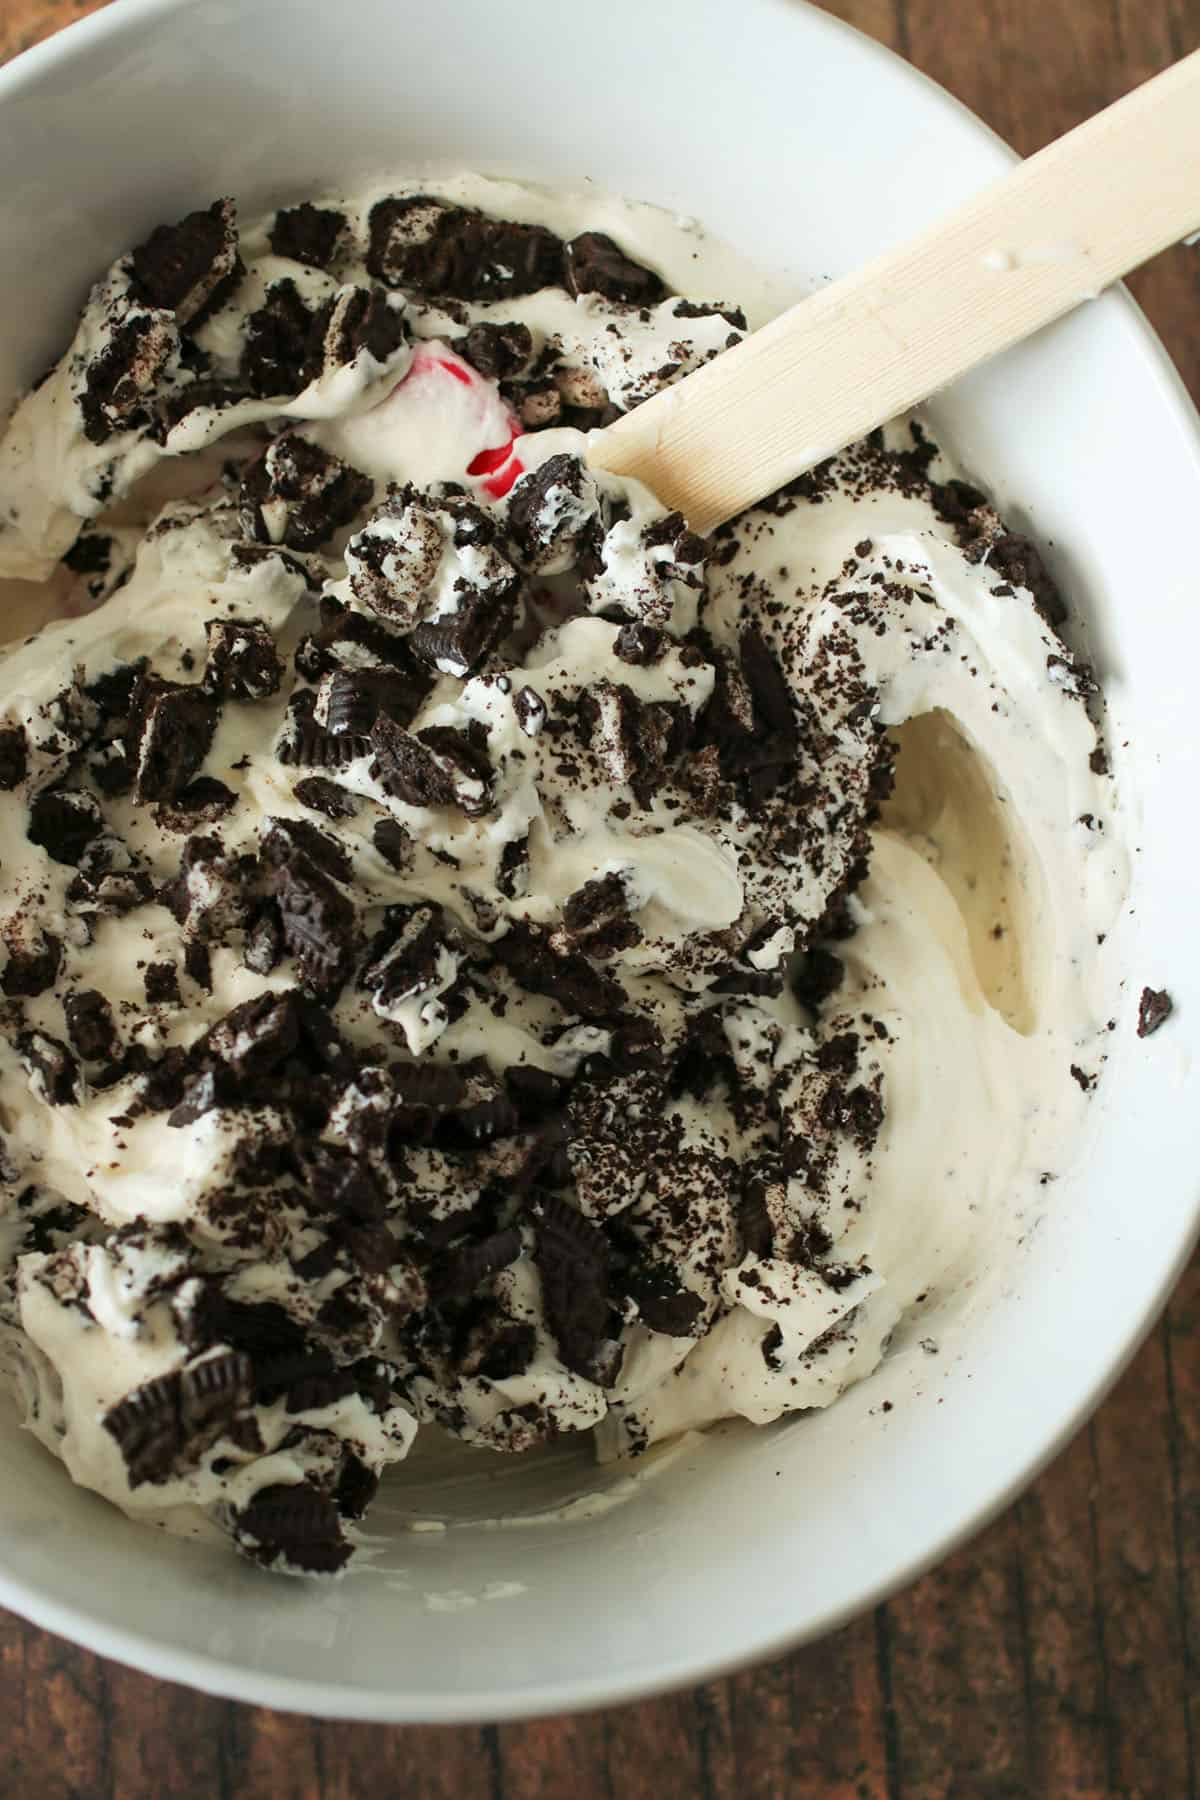 The Oreo frosting in a bowl.